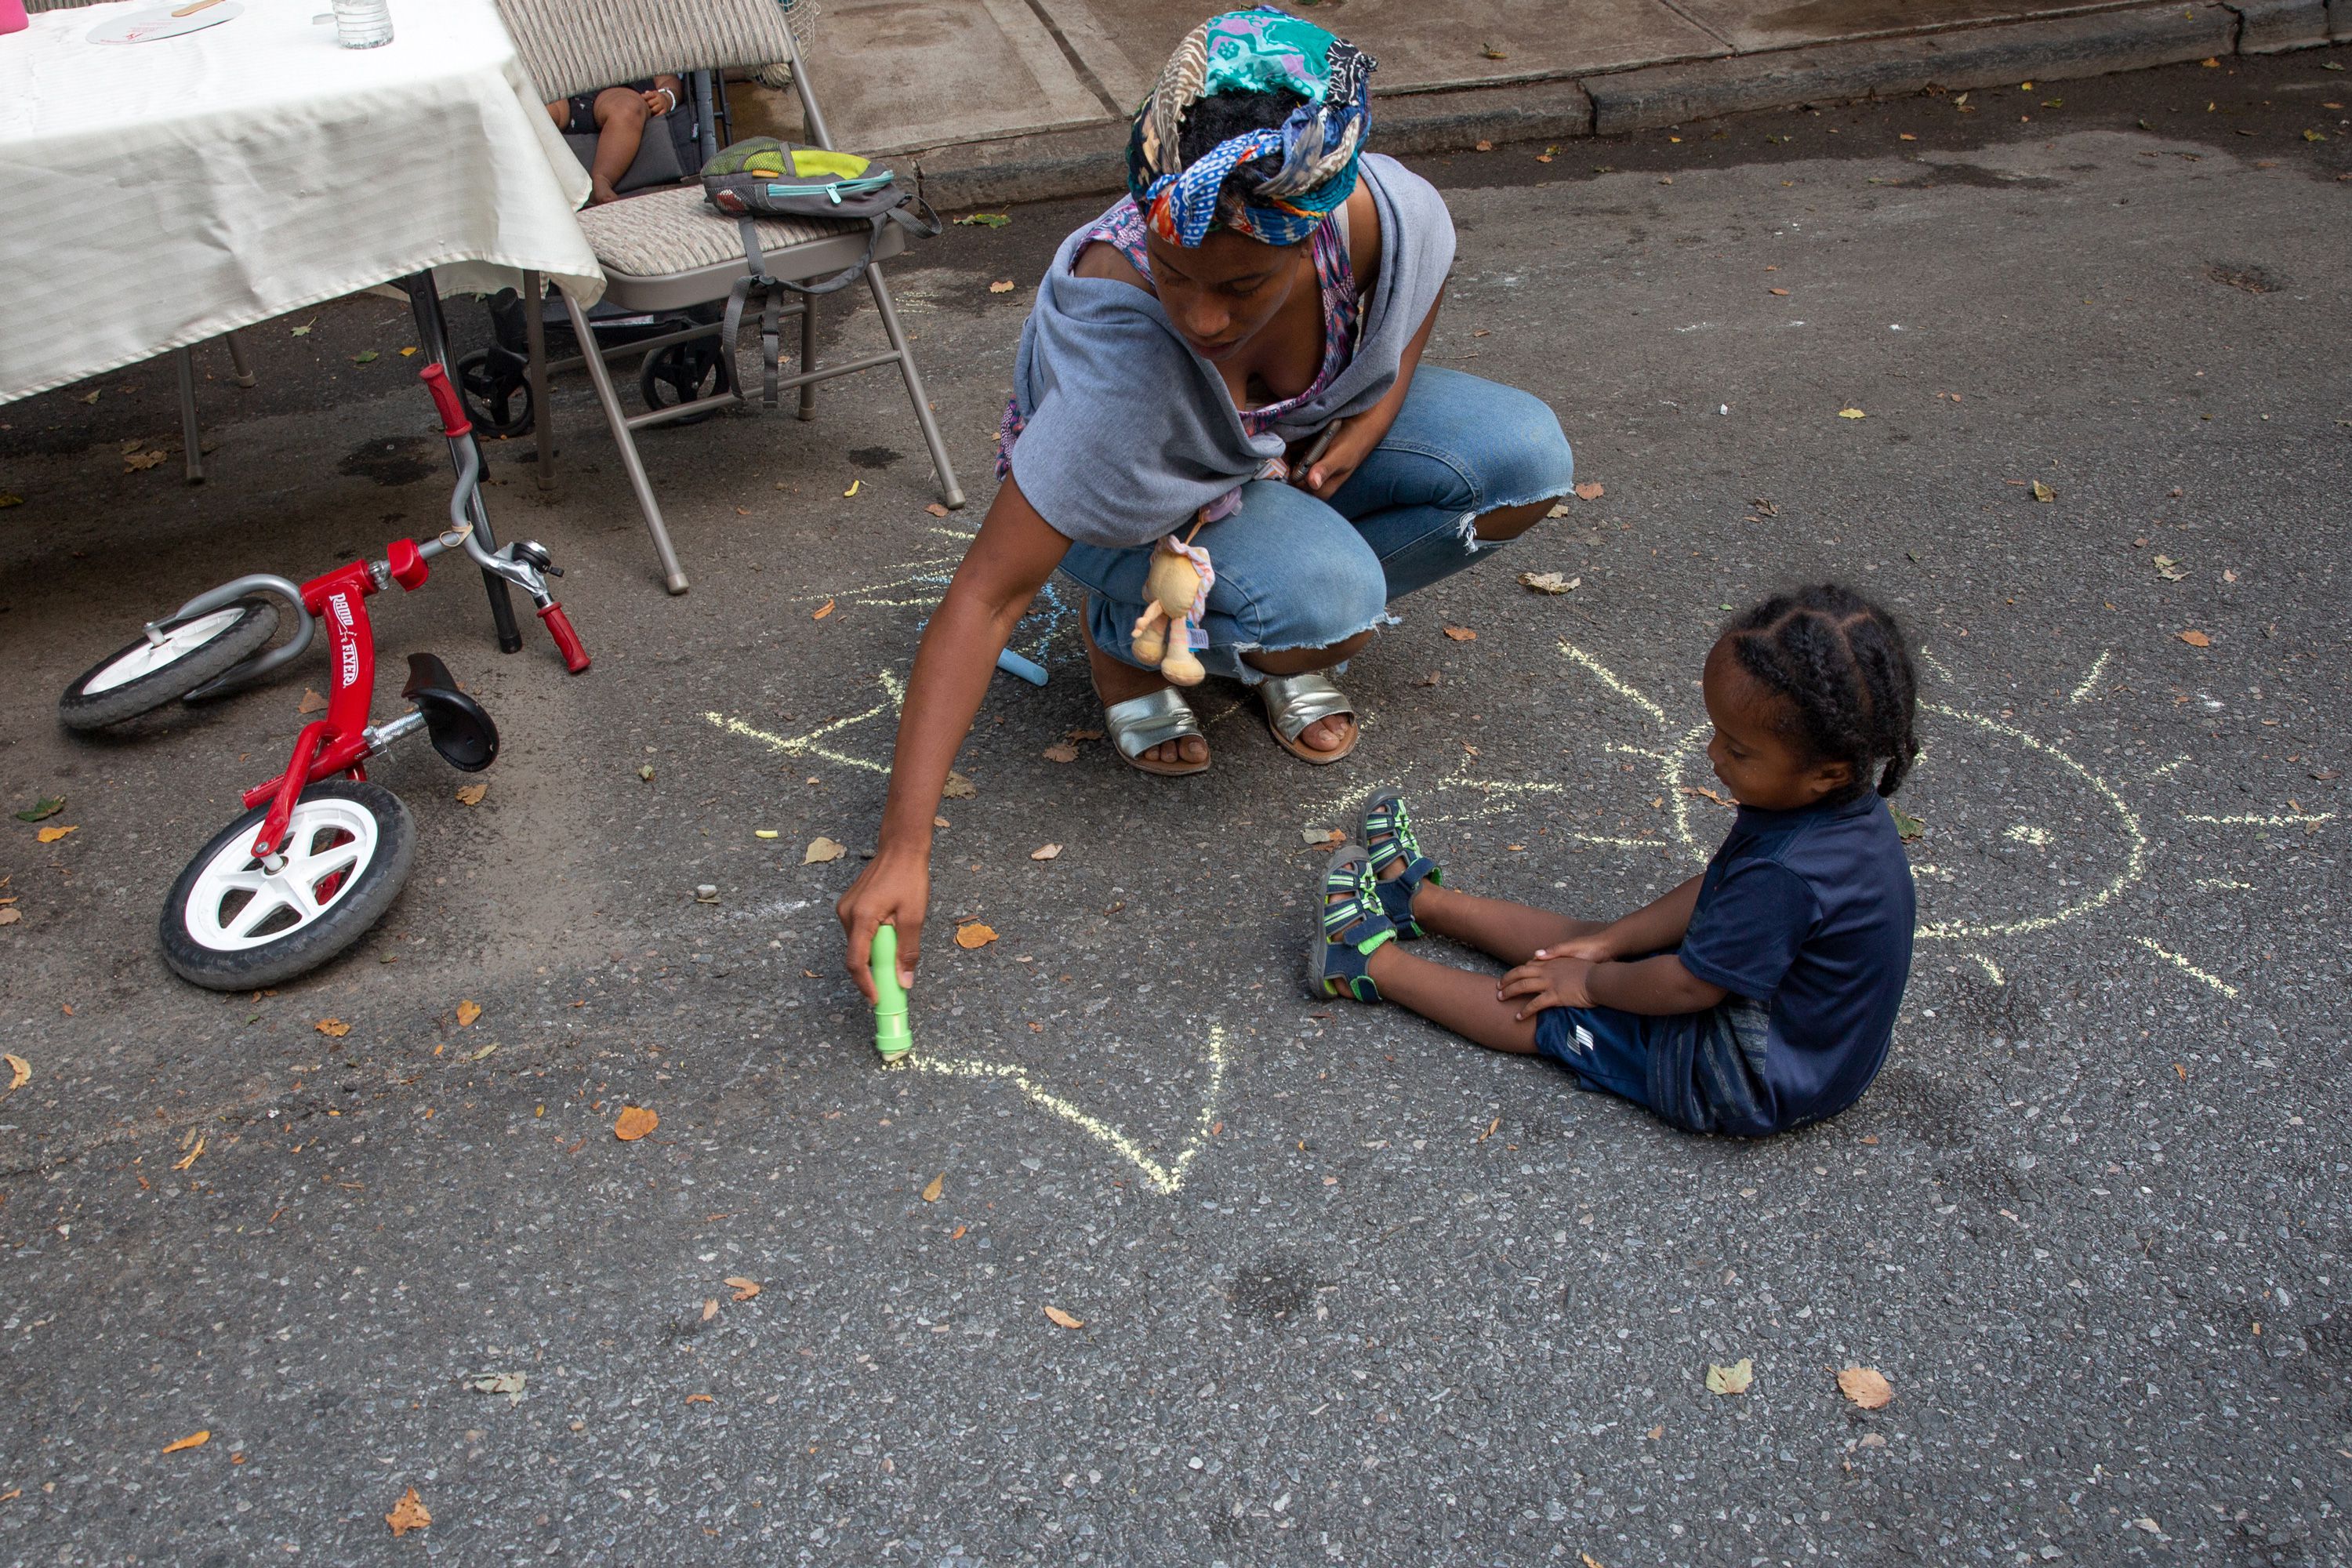 A mother draws on the sidewalk with chalk while her child watches.